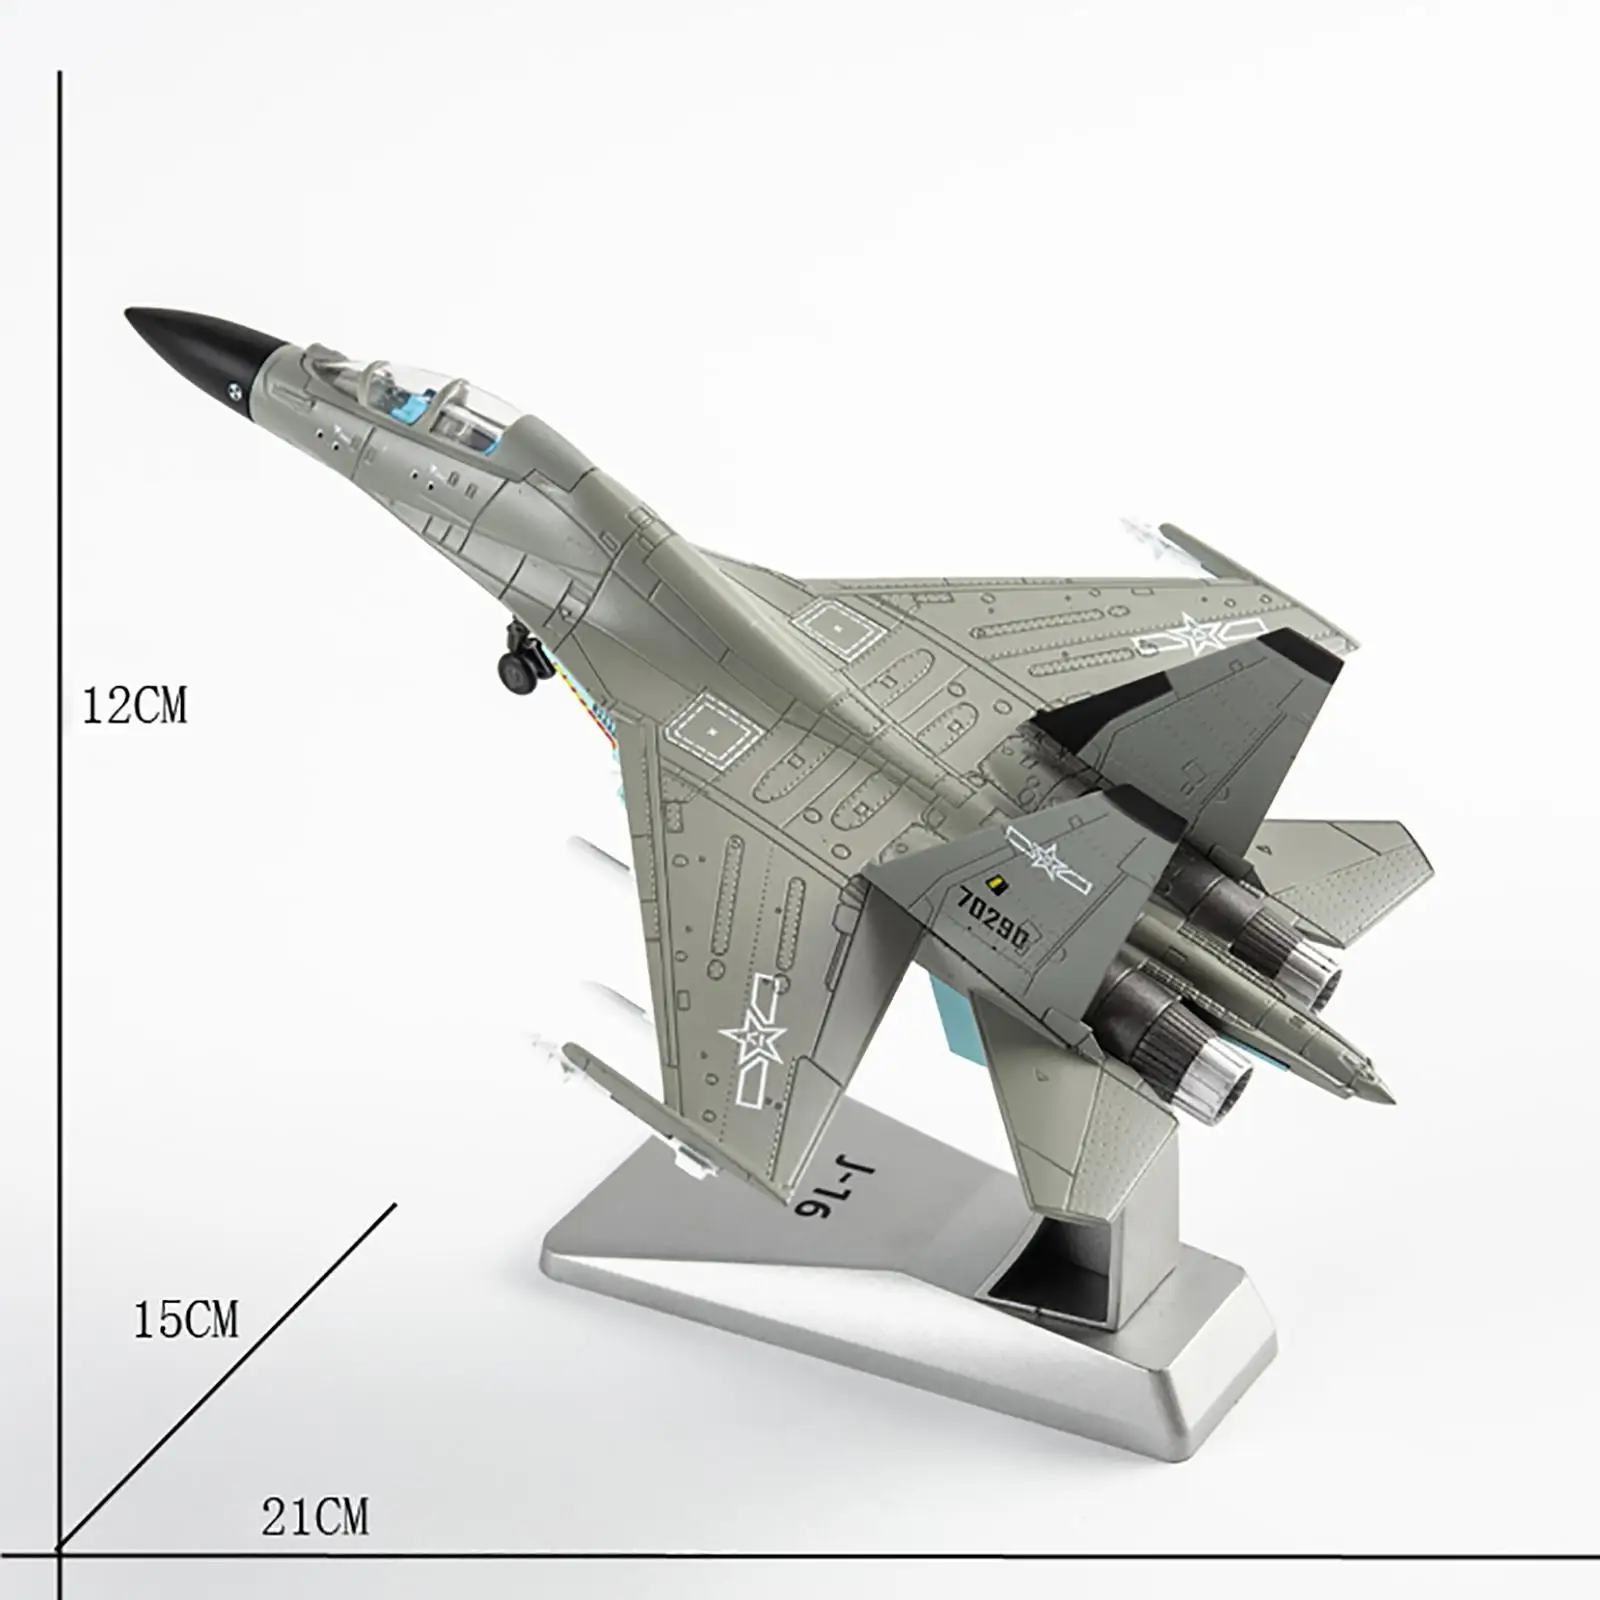 Simulation 1/100 J-16 Metal Fighter Model with Display Stand Desk Decor Souvenir Ornaments Plane Aircraft Airplane Toys